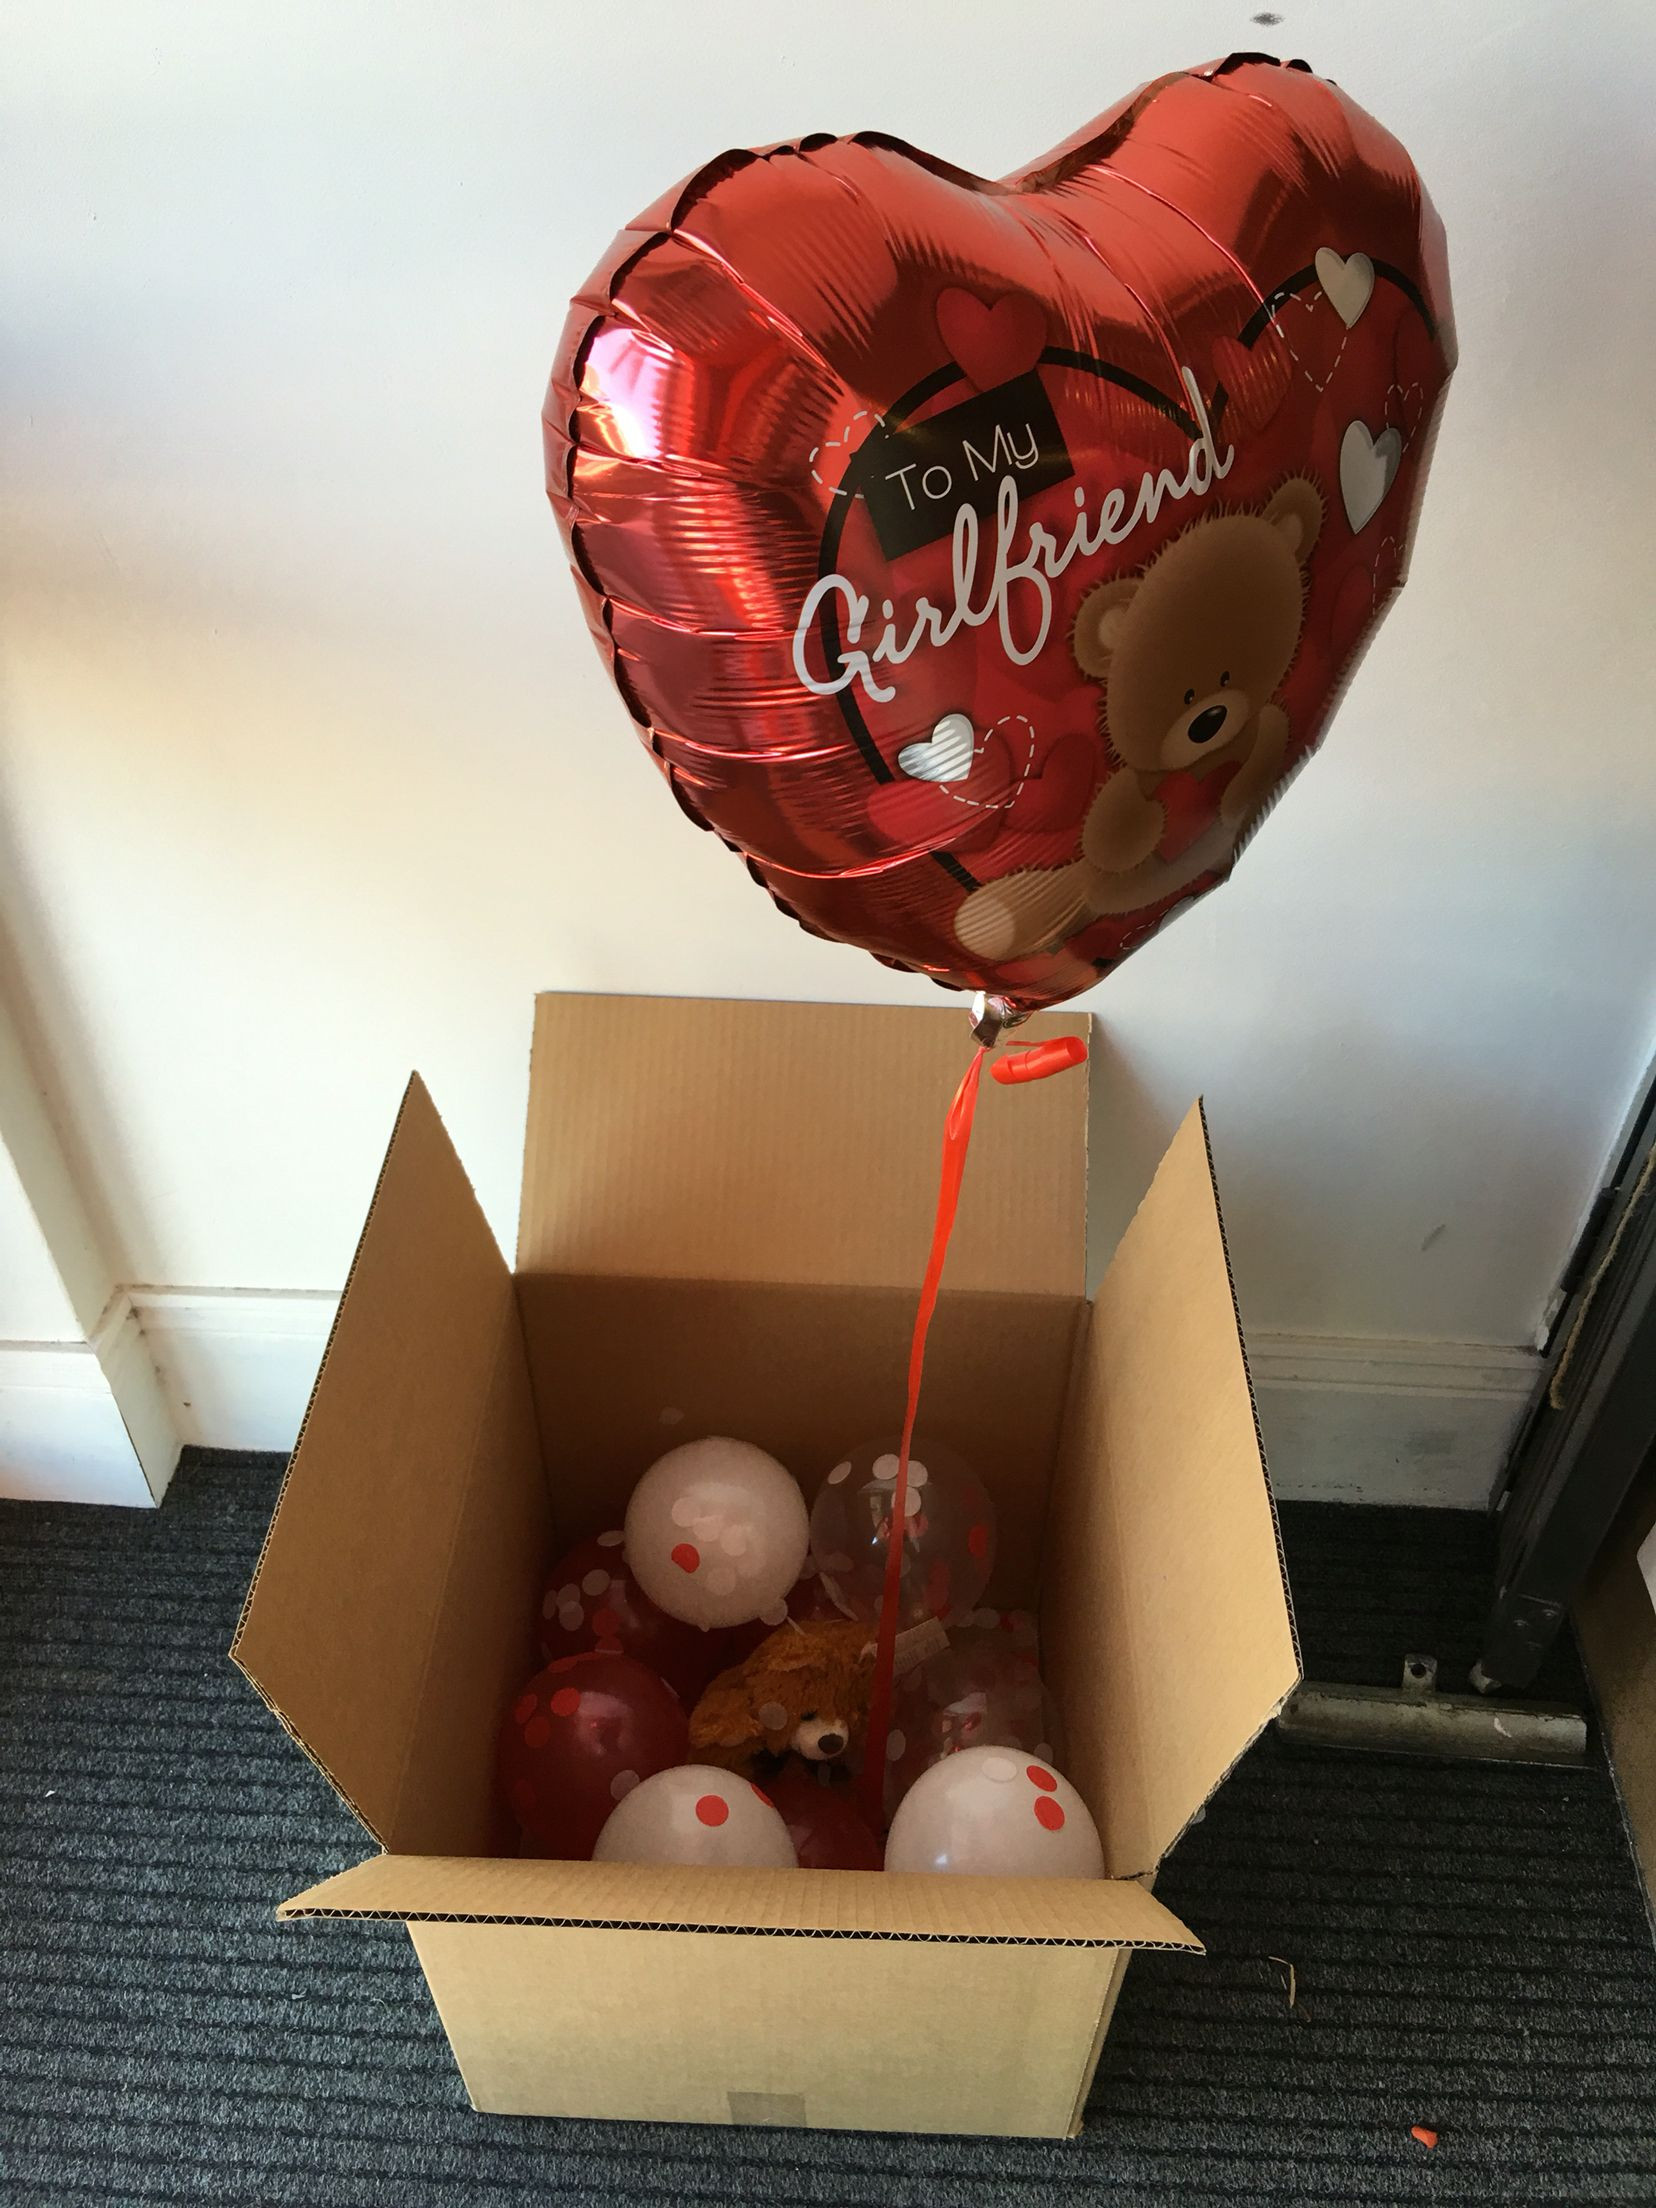 Birthday Gift Ideas For My Girlfriend
 To my girlfriend surprise balloon in the box